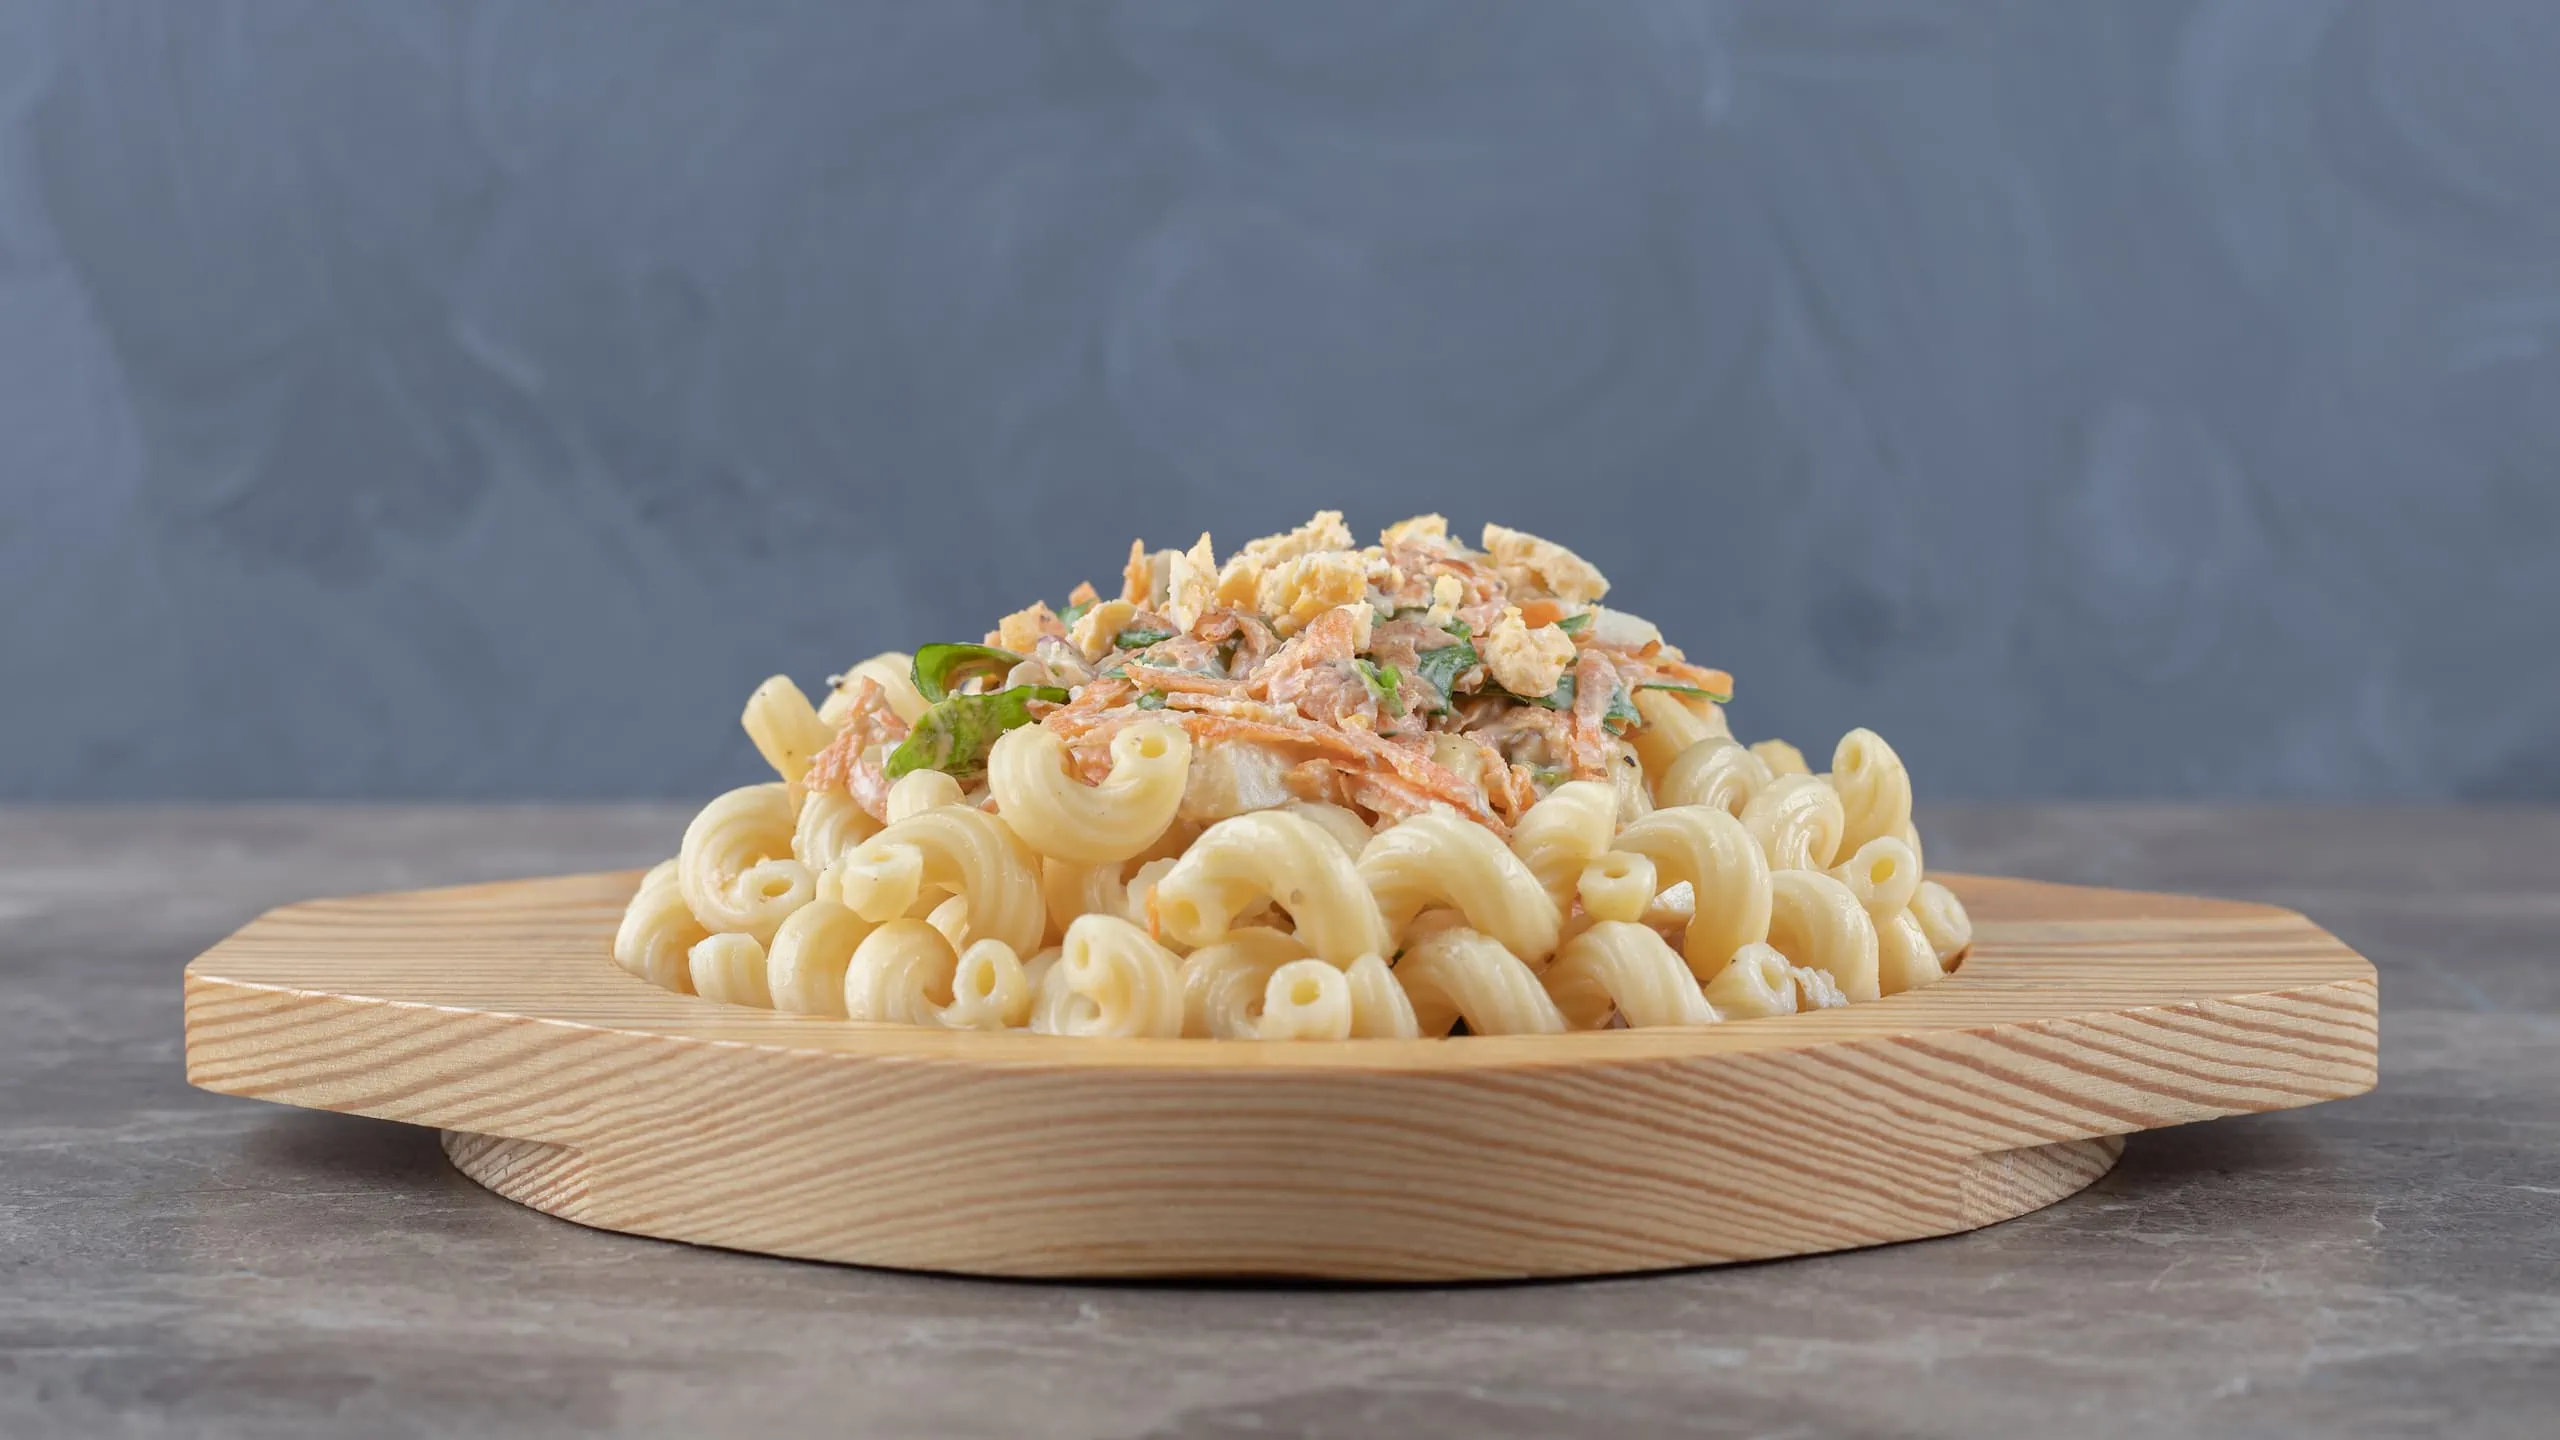 Our version for the L&L Hawaiian's macaroni salad recipe